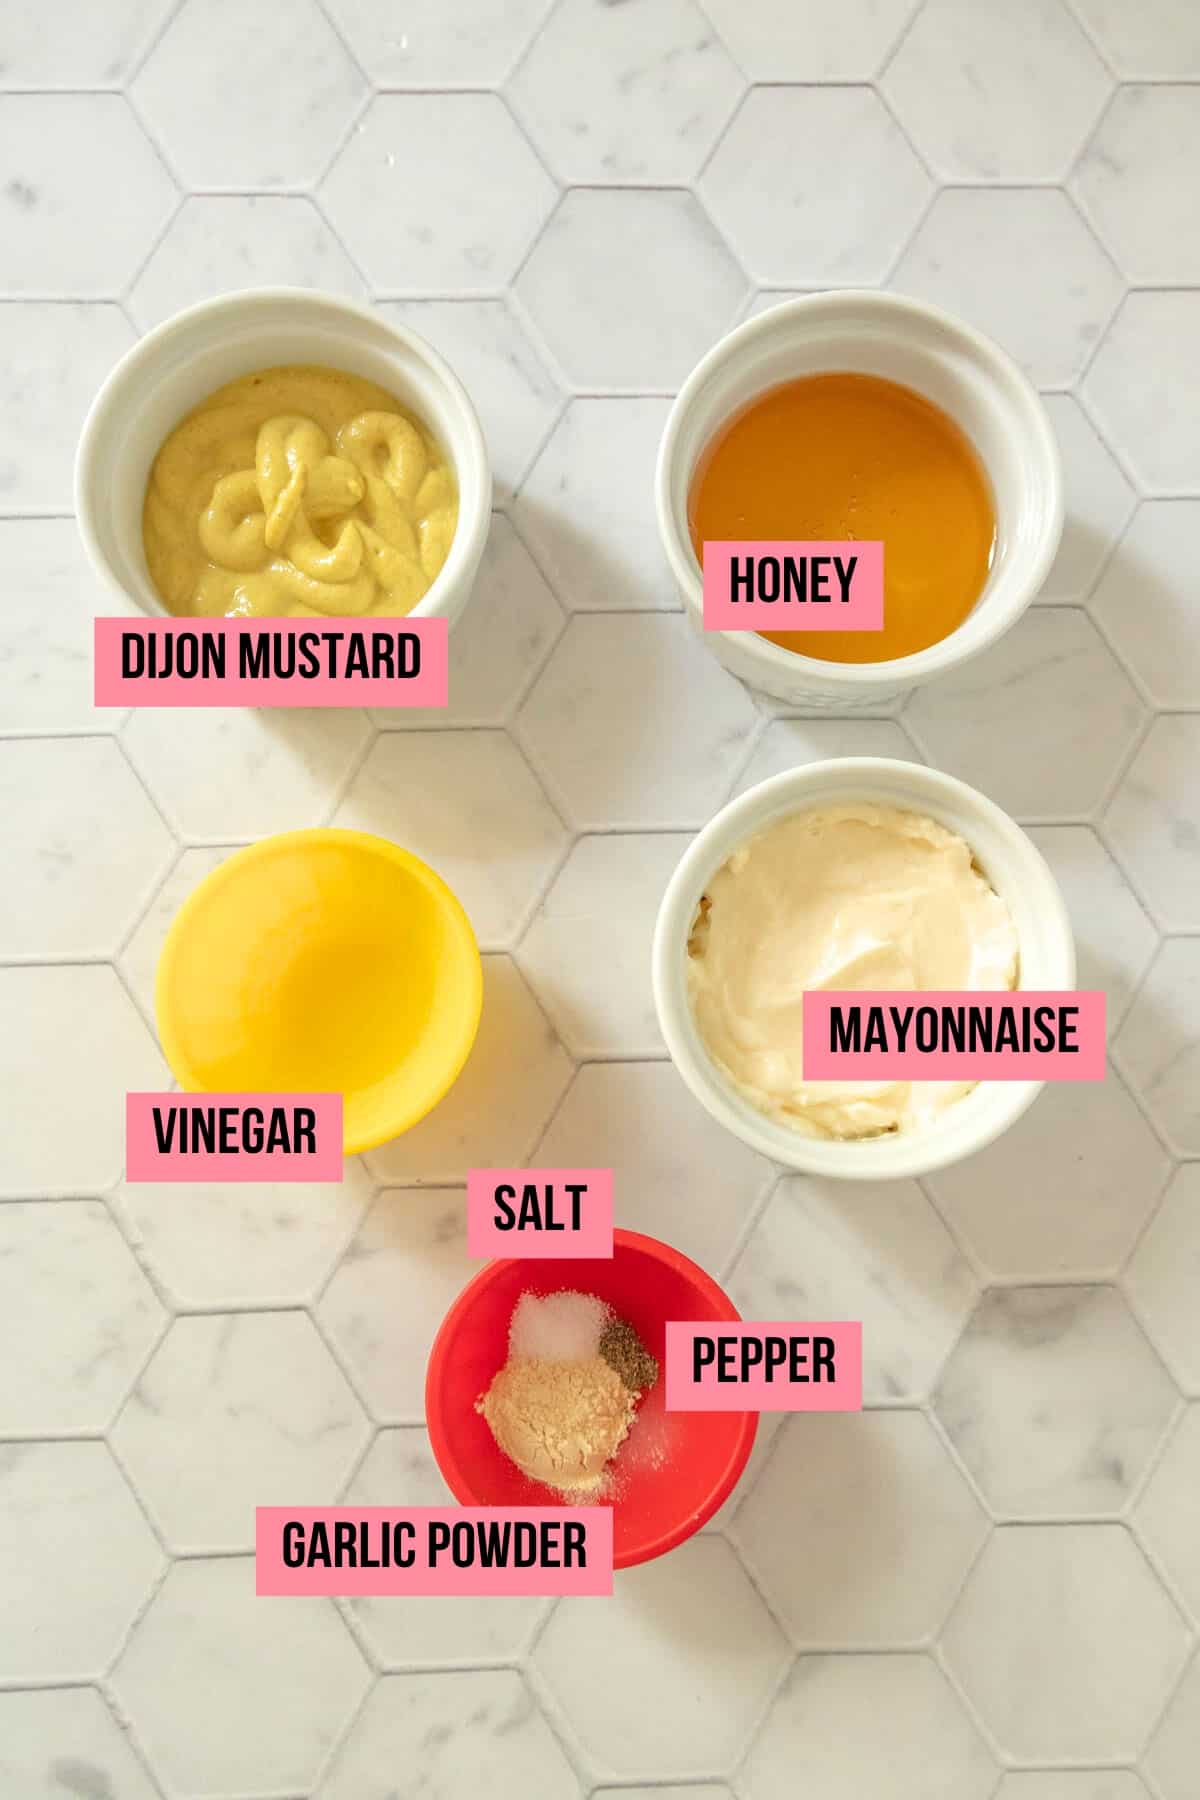 Ingredients for honey mustard sauce on a tile surface with labels.